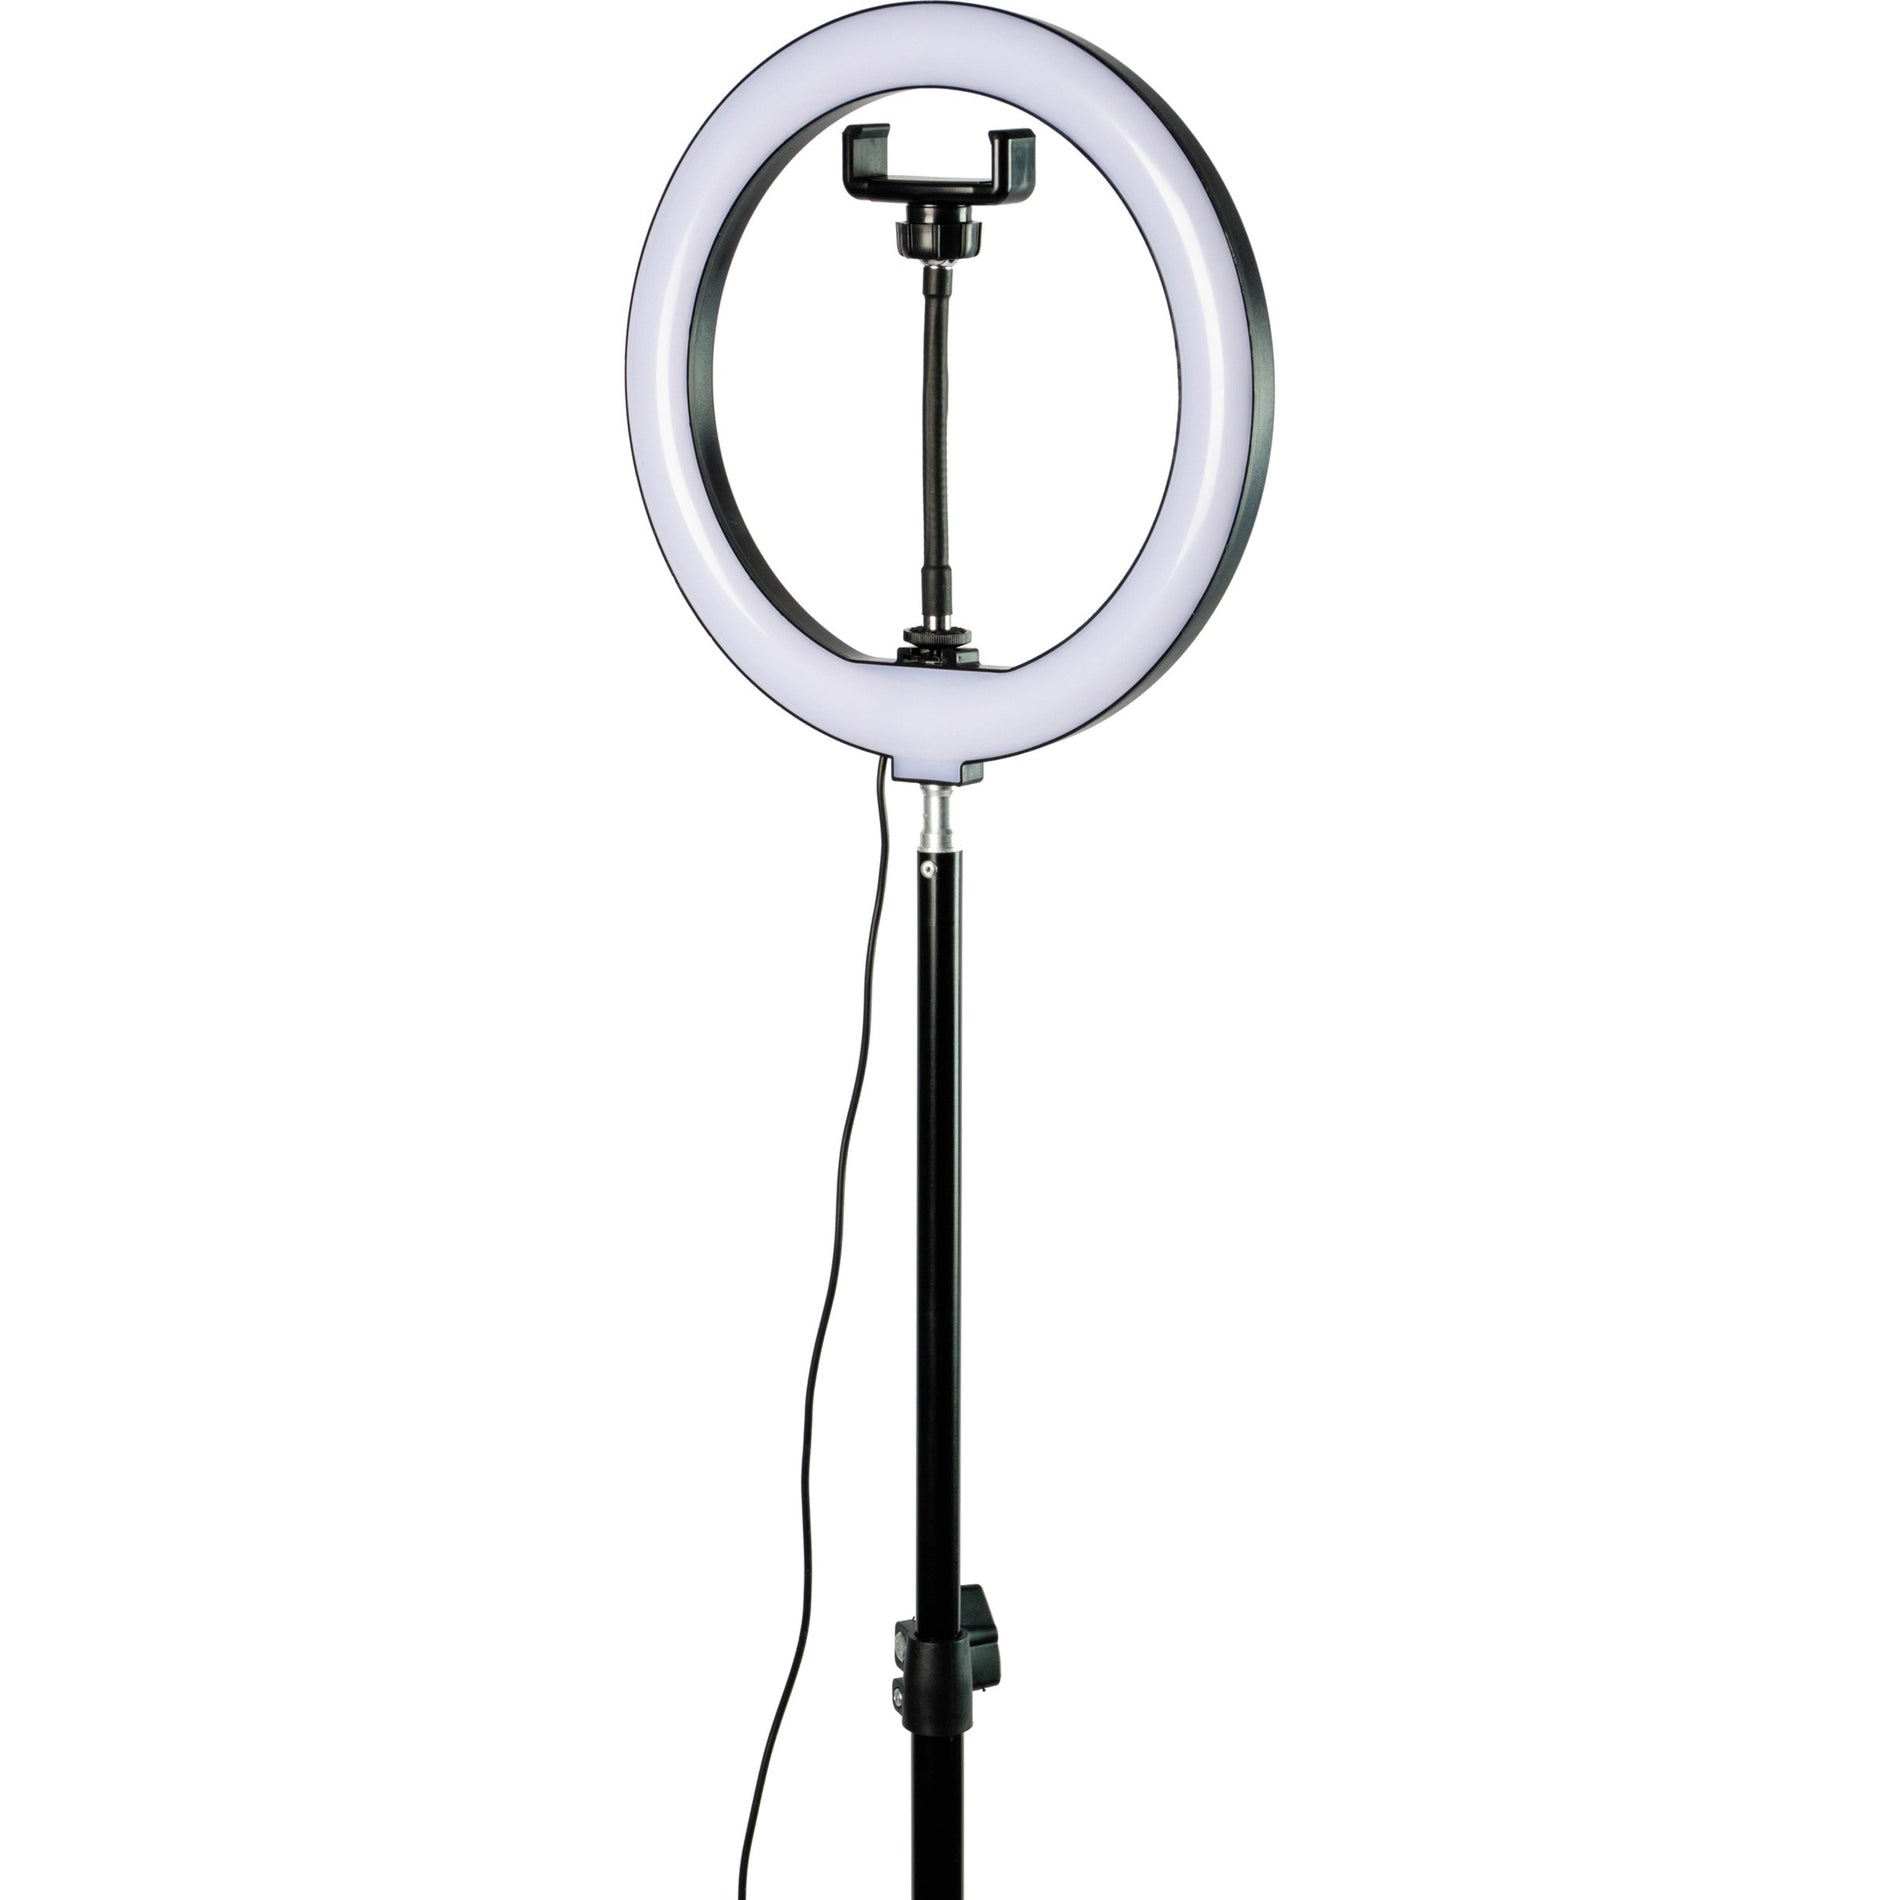 Blackmore BLR-10LED 10 inch LED Ring Light with Phone Holder and Tripod, Perfect for Selfies and Video Recording